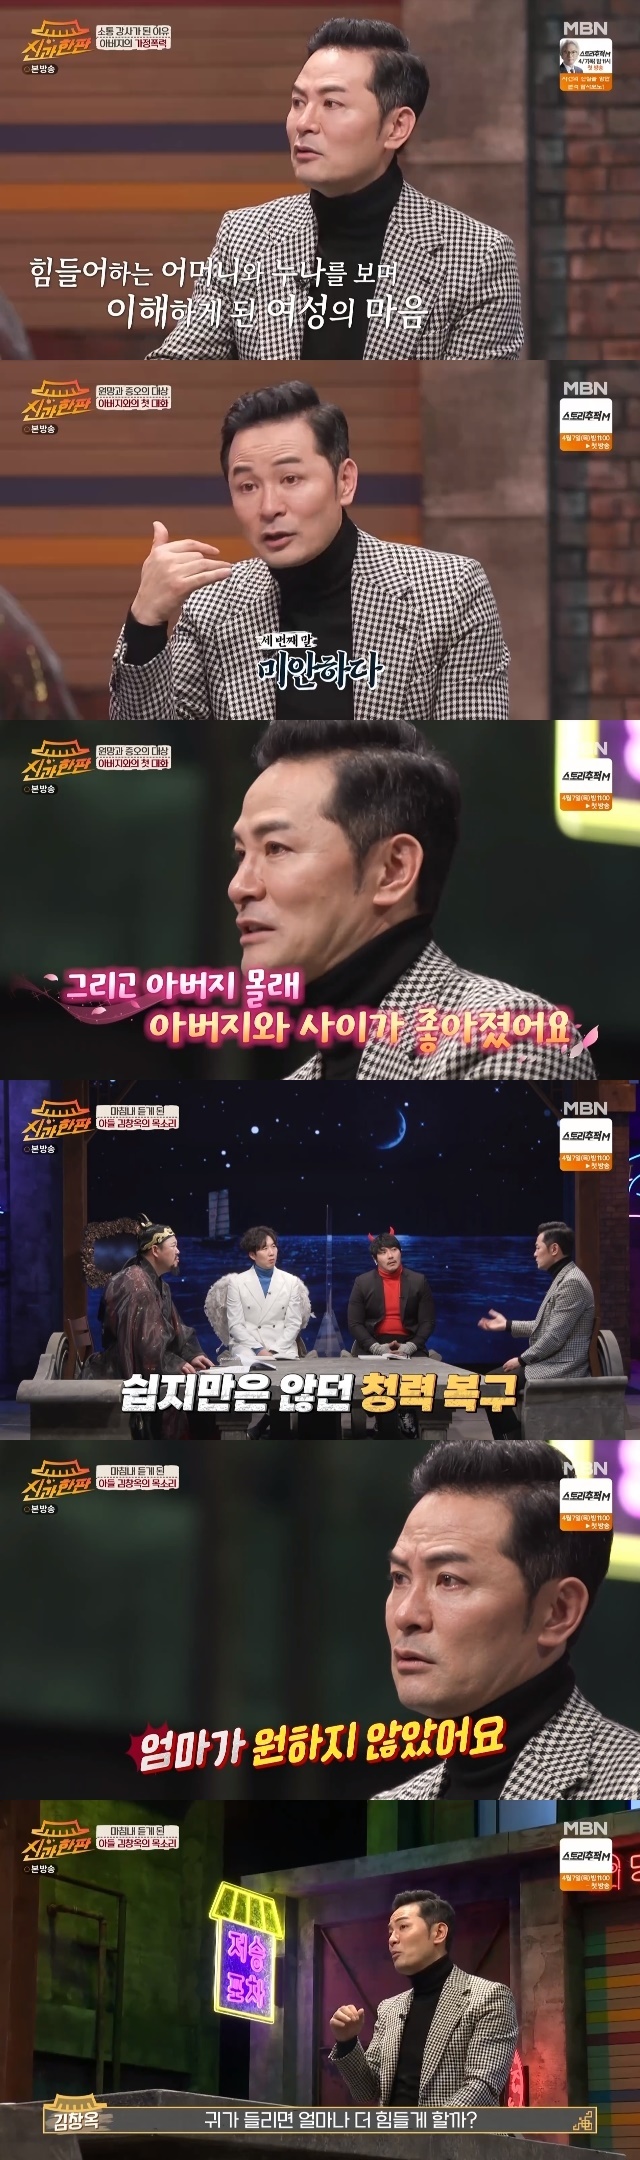 Kim Chang-ok has released a long family history of his fathers domestic violence.In the 10th MBN entertainment a match with god broadcast on April 1, Kim Chang-ok, a communication lecturer, appeared as a guest and talked about the untrue family that made him in his current position.Kim Chang-ok, who was introduced as the prince of his aunts, said that the reason why he could understand the hearts of women as well as now was because of his four sisters, mother, and father who wielded domestic violence.In the past, Kim Chang-ok literally grew up seeing his fathers domestic violence.My father worked in labor, and in a few days he came to violence, and my sisters were told to keep my mother, and I was hit by my mother, and I could not resist.My father was good, my father was not talking. He was a child who kept running away. If my mom and dad had repented, I would not have been a lecturer.I saw my mother live hard because of her father, so I think there is a depth of thought that my children think while watching it. In fact, the reason why my father was forced to be unreunified was because of the disability. Kim Chang-ok said, My father was deaf before I was born.She knew she couldnt hear me when I married my father, and she didnt go to school, so she had to communicate only in words, but she couldnt hear me.What is strange is that if there is one person with a disability in the family, he will not publicize it. His father was a third grade disabled, but his mother did not register. Even his son, Kim Chang-ok, had to notice his fathers disability by elementary school student Sigi himself.Kim Chang-ok, who has been living with his father for a long time, came to communicate with his father one day in his hometown of Jeju Island.The phone call from the hospital asked if Kim Chang-ok could pay for his fathers implants and neurotherapy instead, and when Kim Chang-ok allowed it to happen, his father took over the phone.It was the first time my father had been talking to me because he could not hear my ears. My father told Kim Chang-ok, Im a fool.Kim Chang-ok said, I always thought about it. One day my father should say to my mother and my child that I am sorry.I dont feel good about being sorry, but I think my father is old now, and he has no strength, and hes sorry for what hes got.Then, my father secretly got along with my father. In addition to this, Jeju Island, who visited one day, sent himself to the airport and his fathers sagging shoulder and I walked to make Kim Chang-ok love his father.The reason why Kim Chang-ok decided to restore his fathers hearing in earnest was his childs problem.Kim Chang-ok said, I do not know my daughter, but I am very strict with my twin sons. The problem with my father was inherited and inherited.I think Im going to have to do something to solve this.So I went to the best hospital in Korea and I learned about my fathers hearing, and I heard that I heard a sound when I transplanted an artificial cochlear implant. However, there was an unexpected difficulty before the surgery. Kim Chang-ok said, Money is not a problem, but my mother did not want it.Because my father made my mother hard for the rest of my life even if I could not hear her ears, but how much harder she would have left (she wanted) However, according to Kim Chang-oks mind, My father is so sorry and I want to do it. My father recovered his hearing.Kim Chang-ok said that his father had been listening to the sound for one to one and a half years after surgery and left the world last winter.I am sad, but I feel sad that I have not been able to solve my homework forever. I am still sad because of my own face-to-face process from my fathers I am sorry .I never had a fatherly experience of him. It was so black holes that I sucked everything in. Its gone quite a bit now and the kids have improved. 